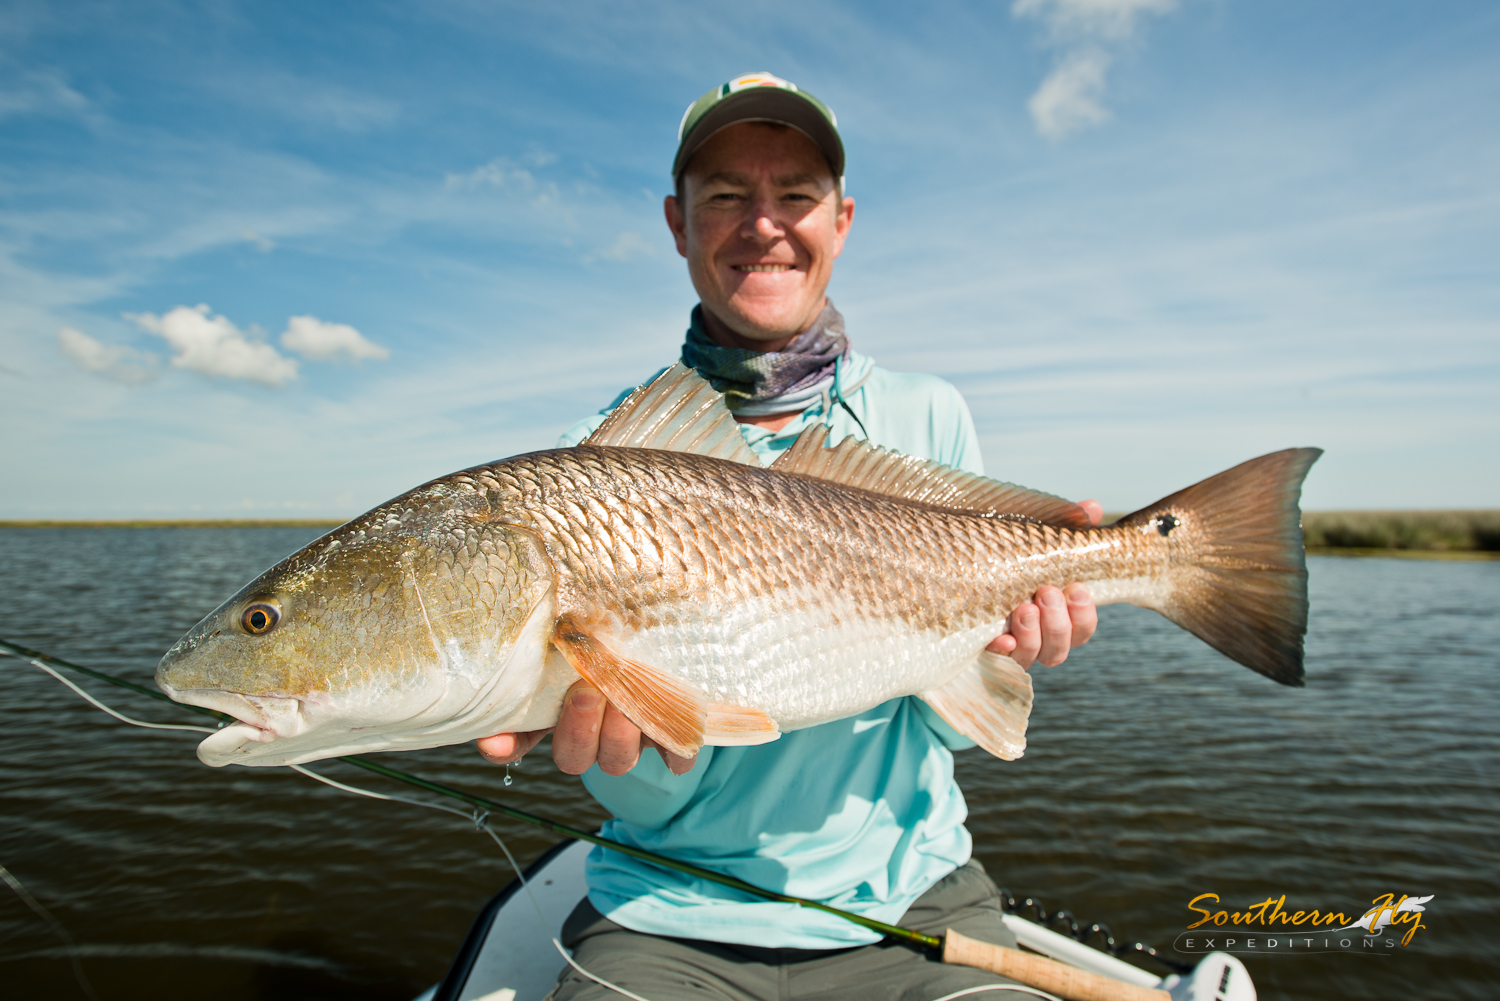 Kentucky Anglers Fly Fishing New Orleans Southern Fly Expeditions 